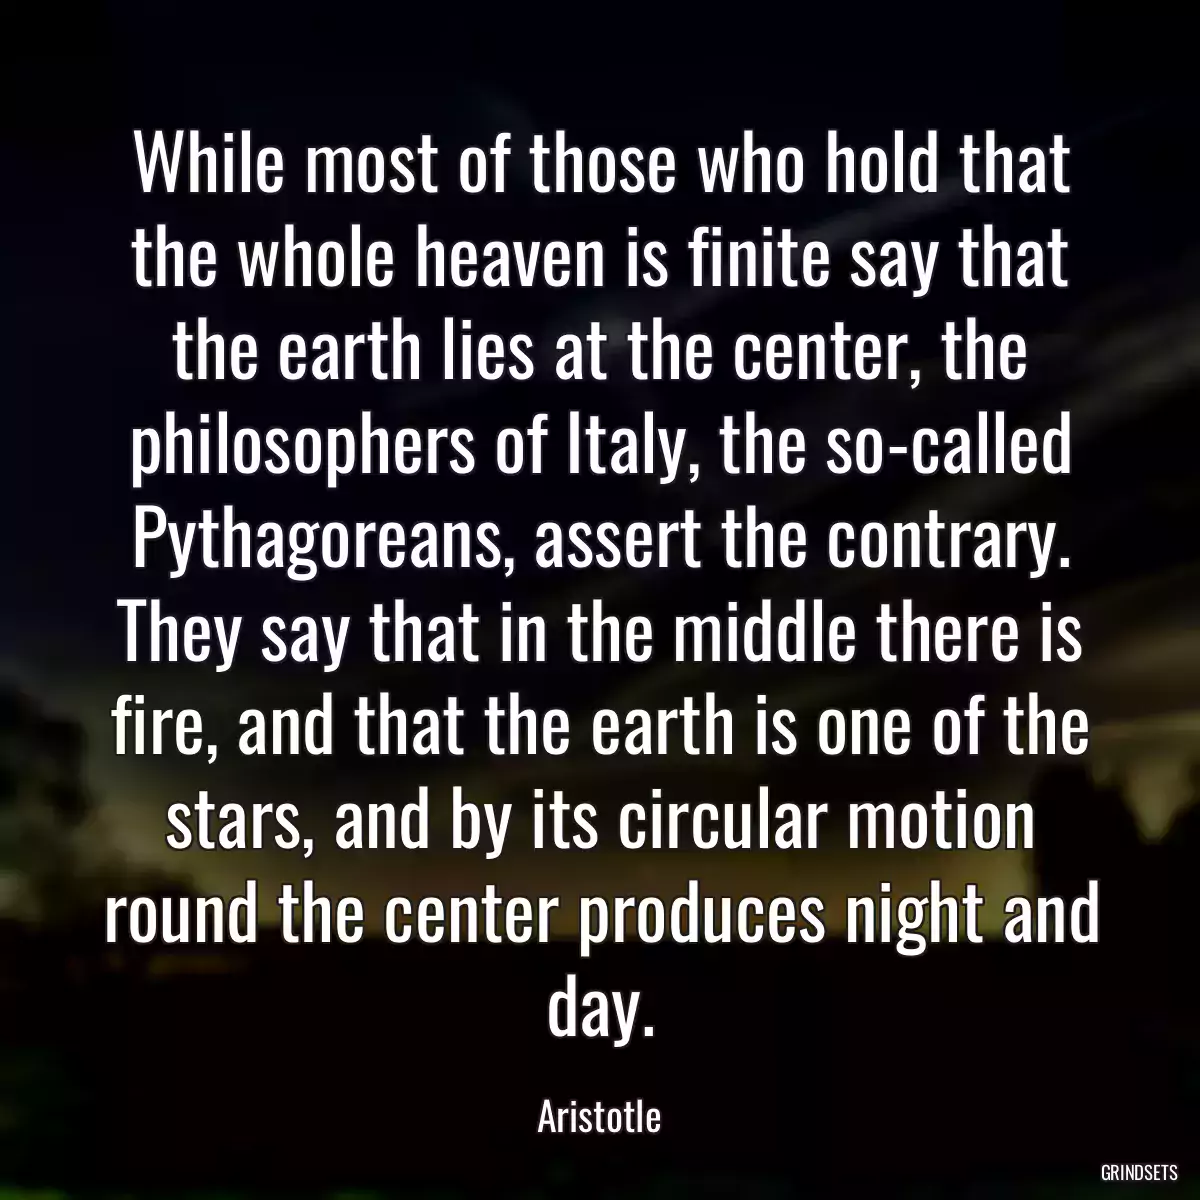 While most of those who hold that the whole heaven is finite say that the earth lies at the center, the philosophers of Italy, the so-called Pythagoreans, assert the contrary. They say that in the middle there is fire, and that the earth is one of the stars, and by its circular motion round the center produces night and day.